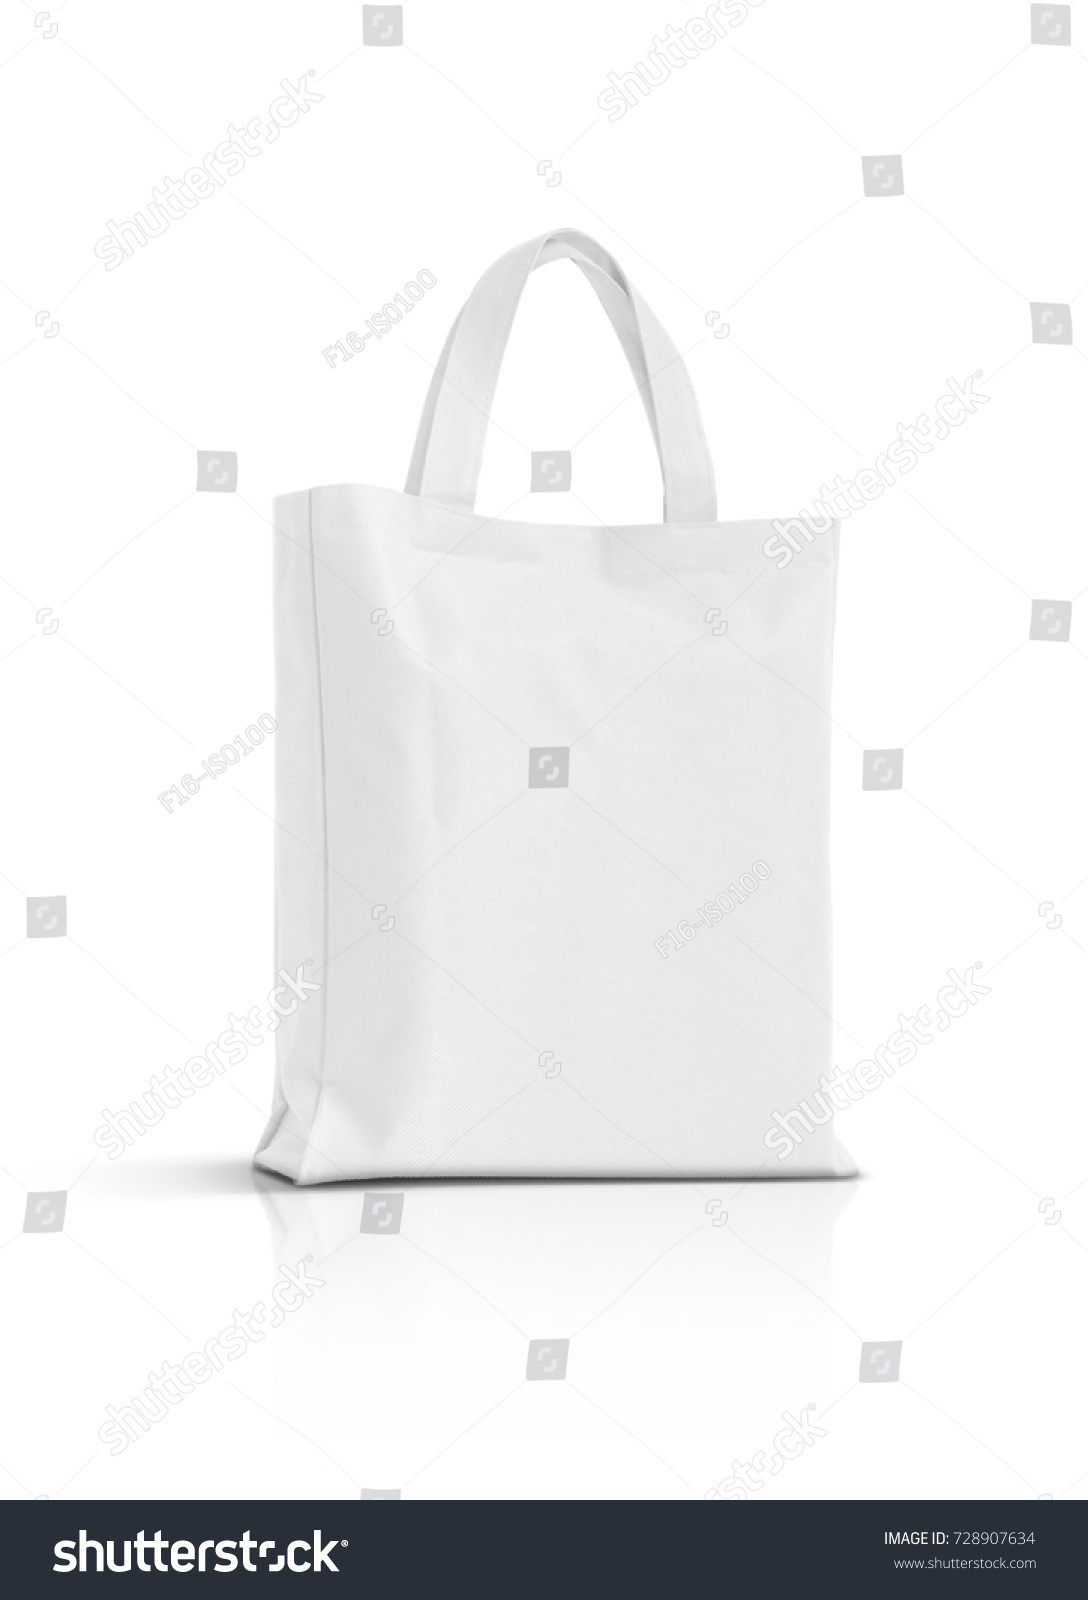 blank white fabric canvas bag for shopping isolated on white background #728907634